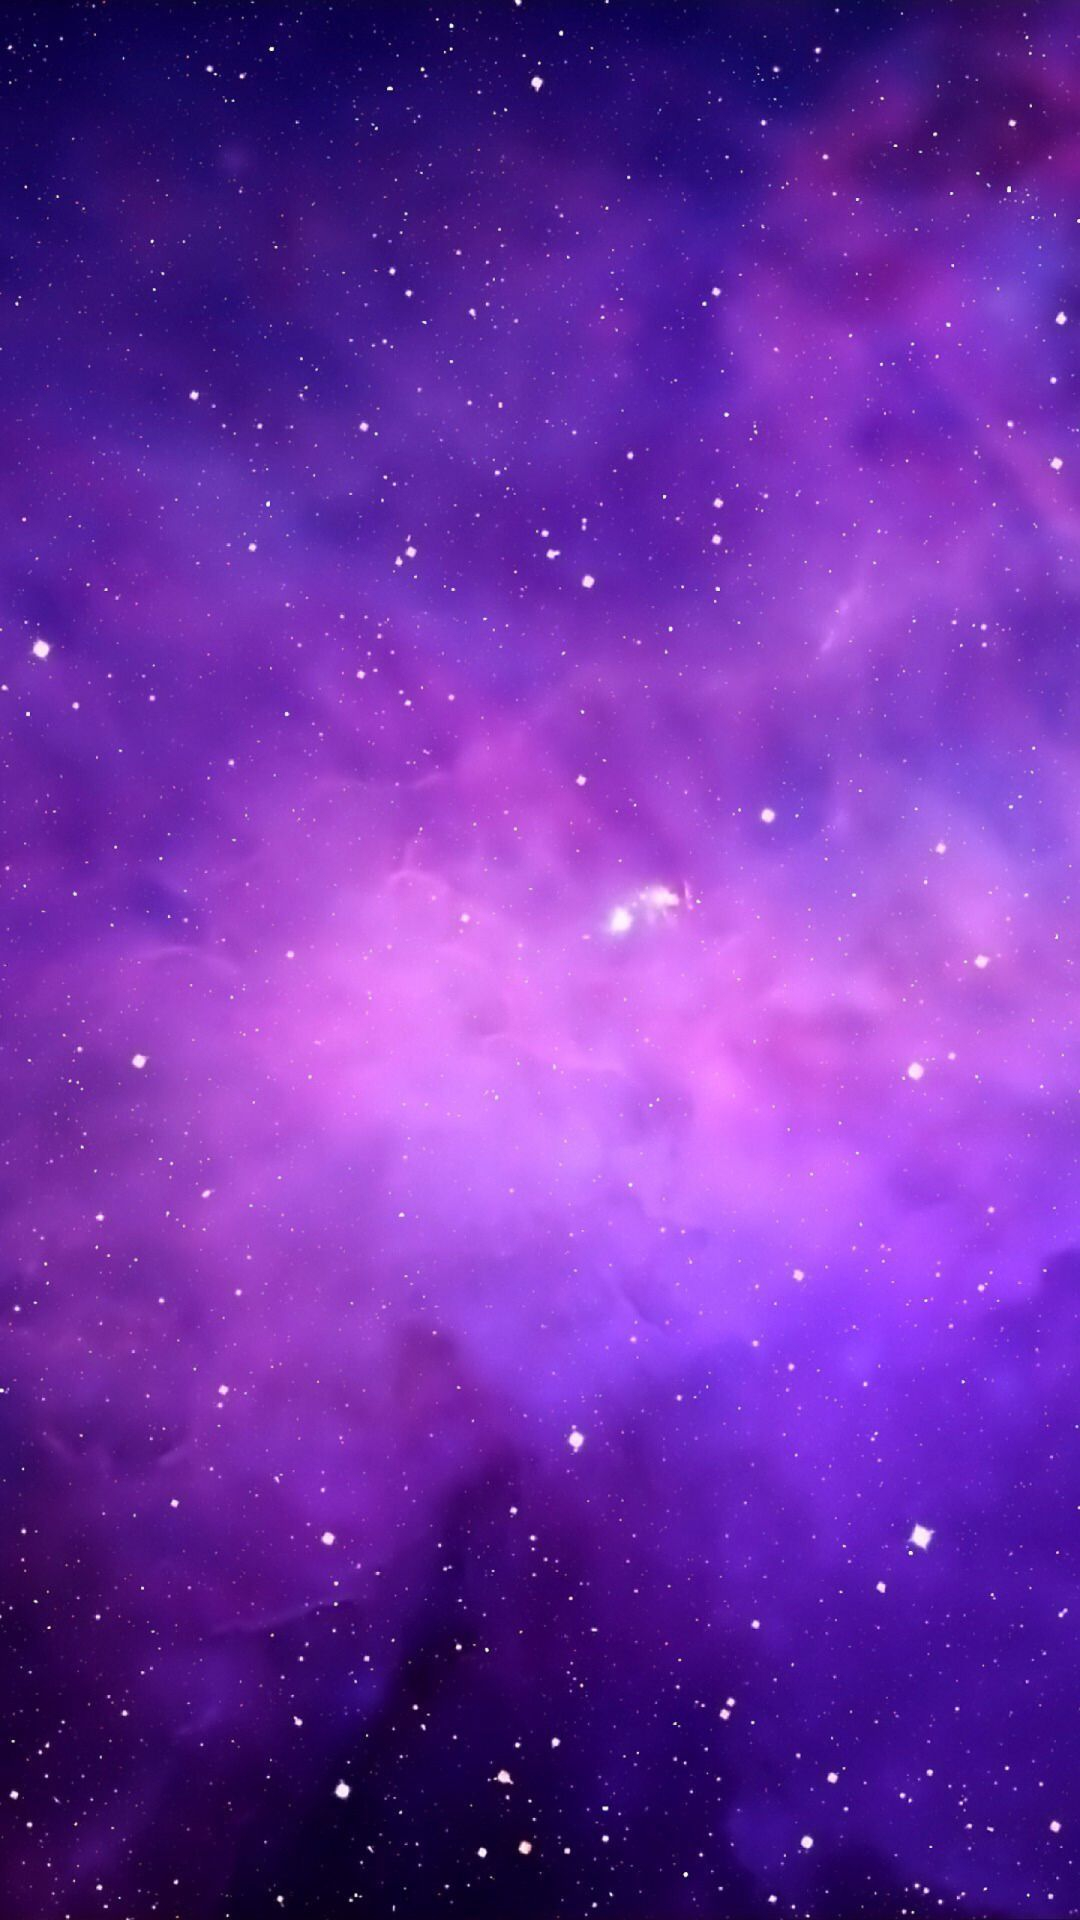 1080x1920 Awesome Purple Aesthetic Wallpapers | Purple aesthetic background, Purple galaxy wallpaper, Aesthetic galaxy